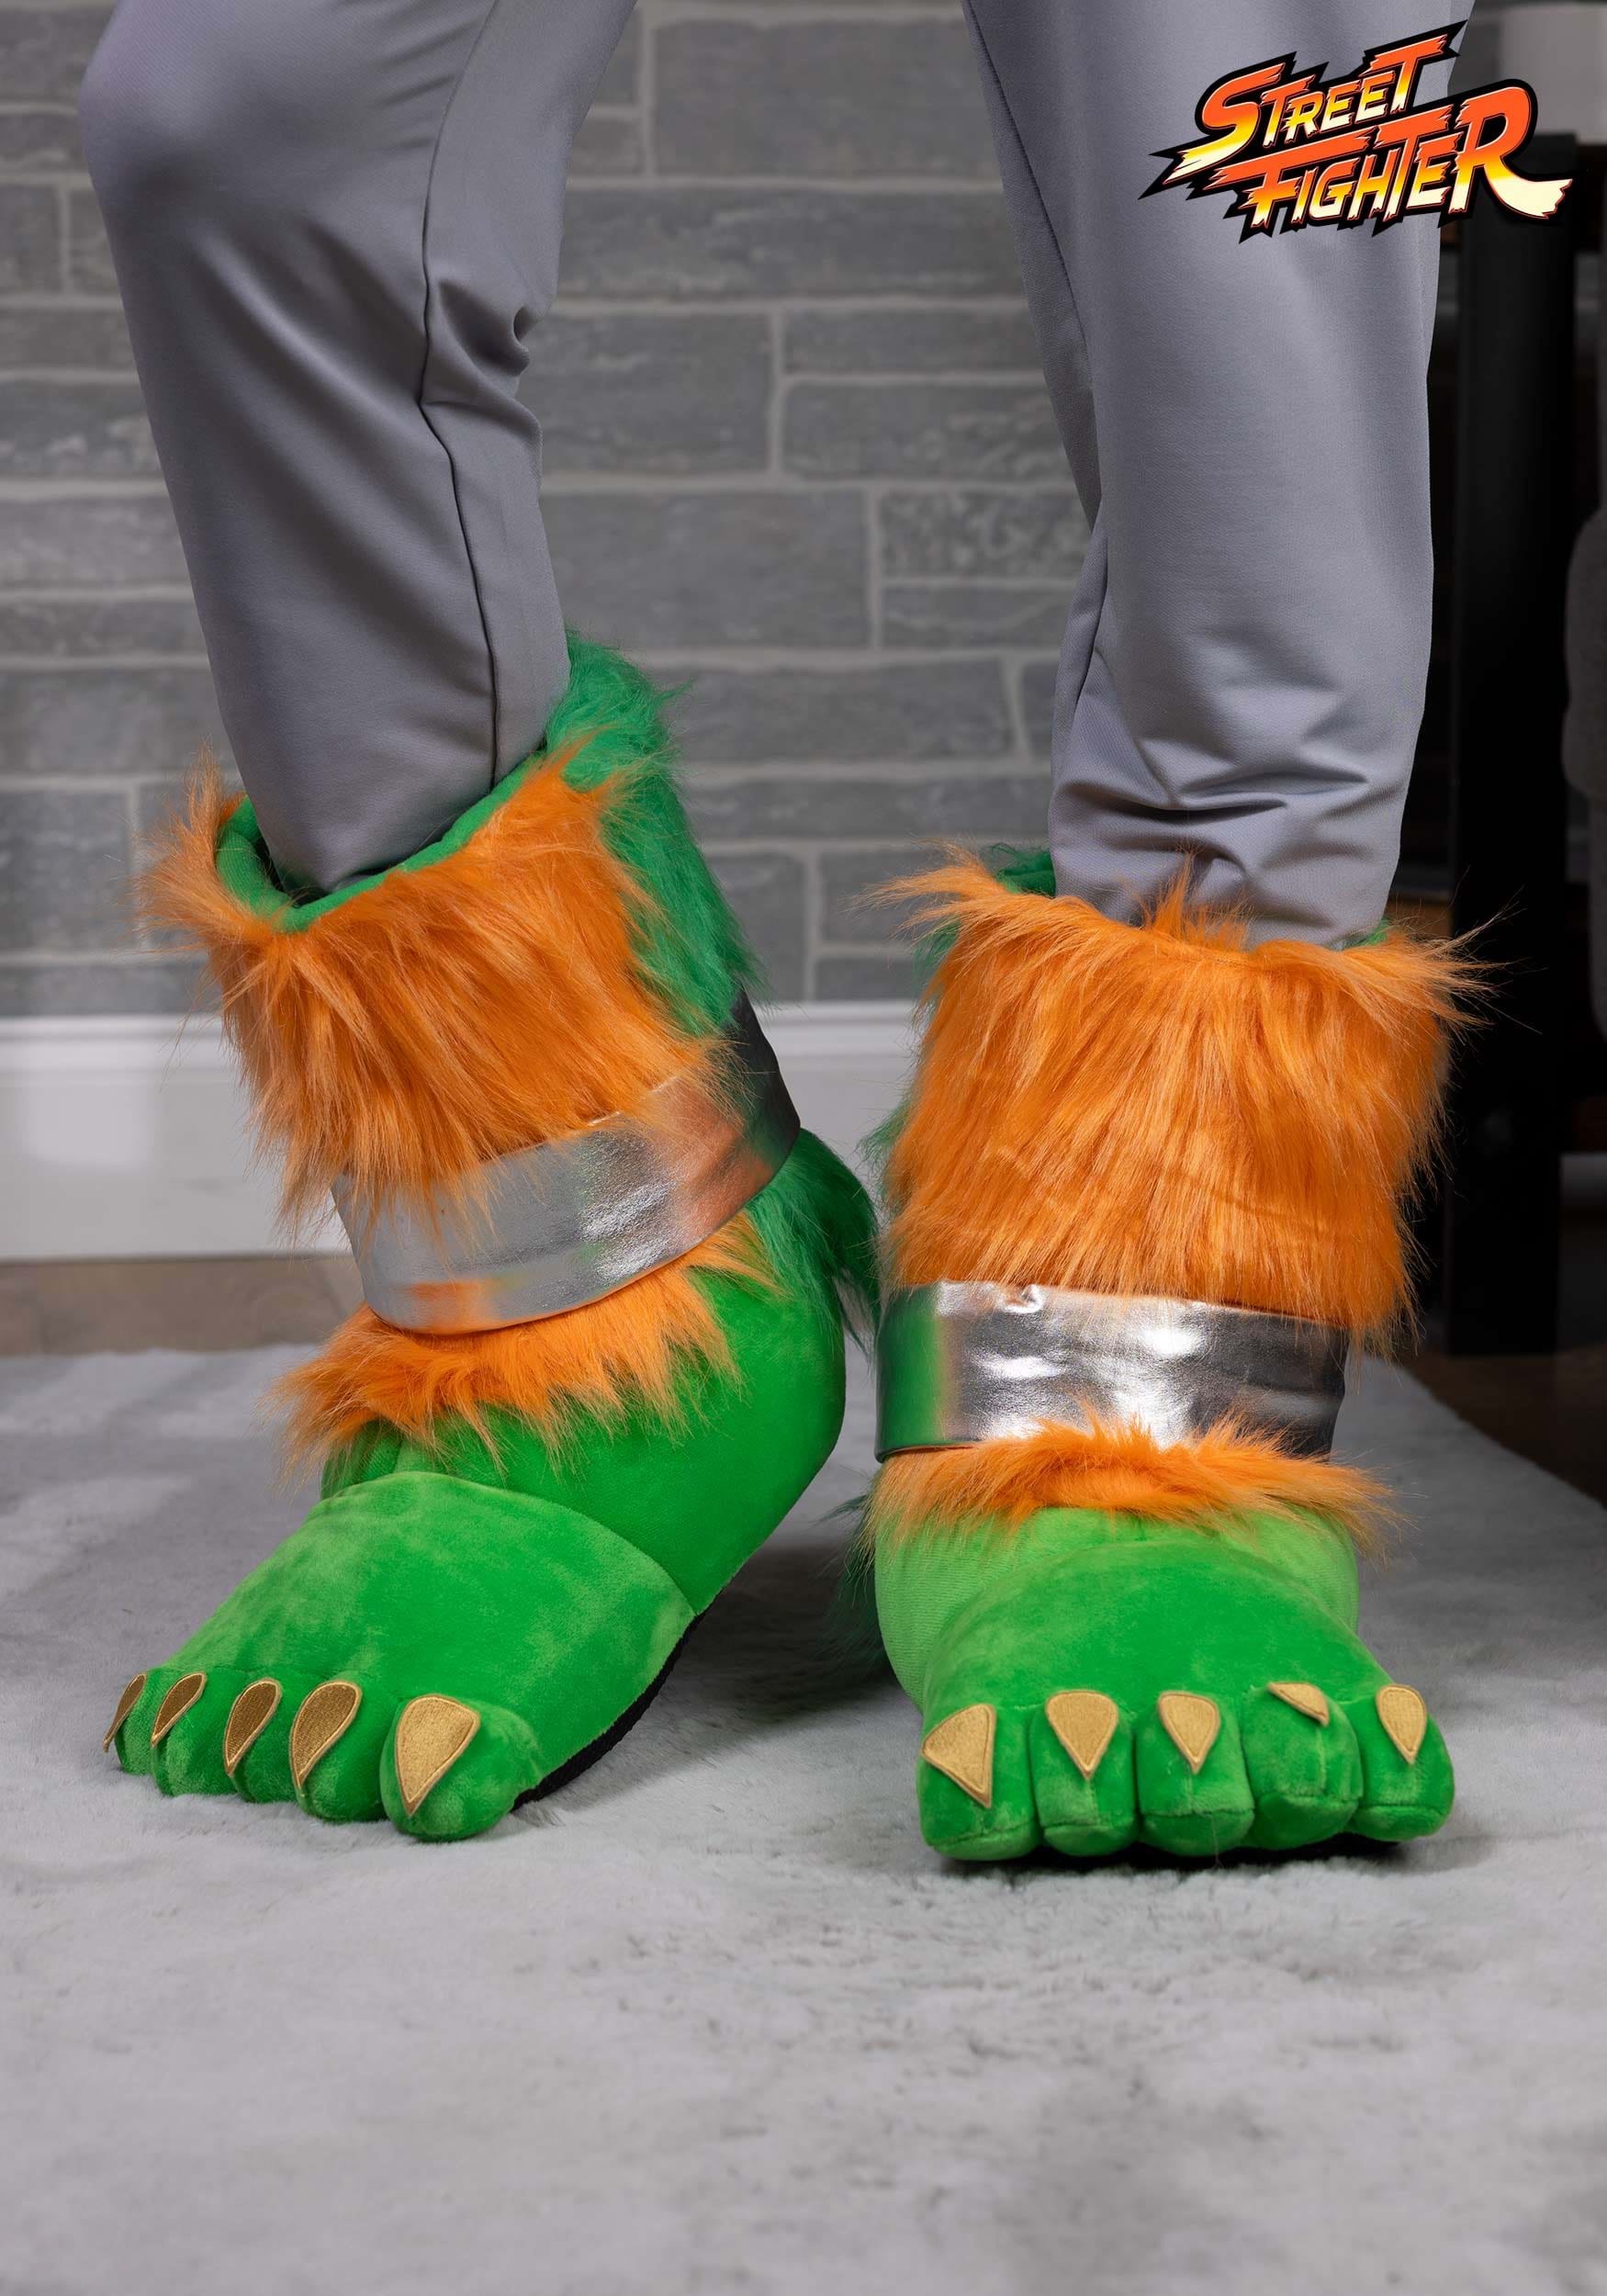 The Real Reason Blanka From Street Fighter Is Green